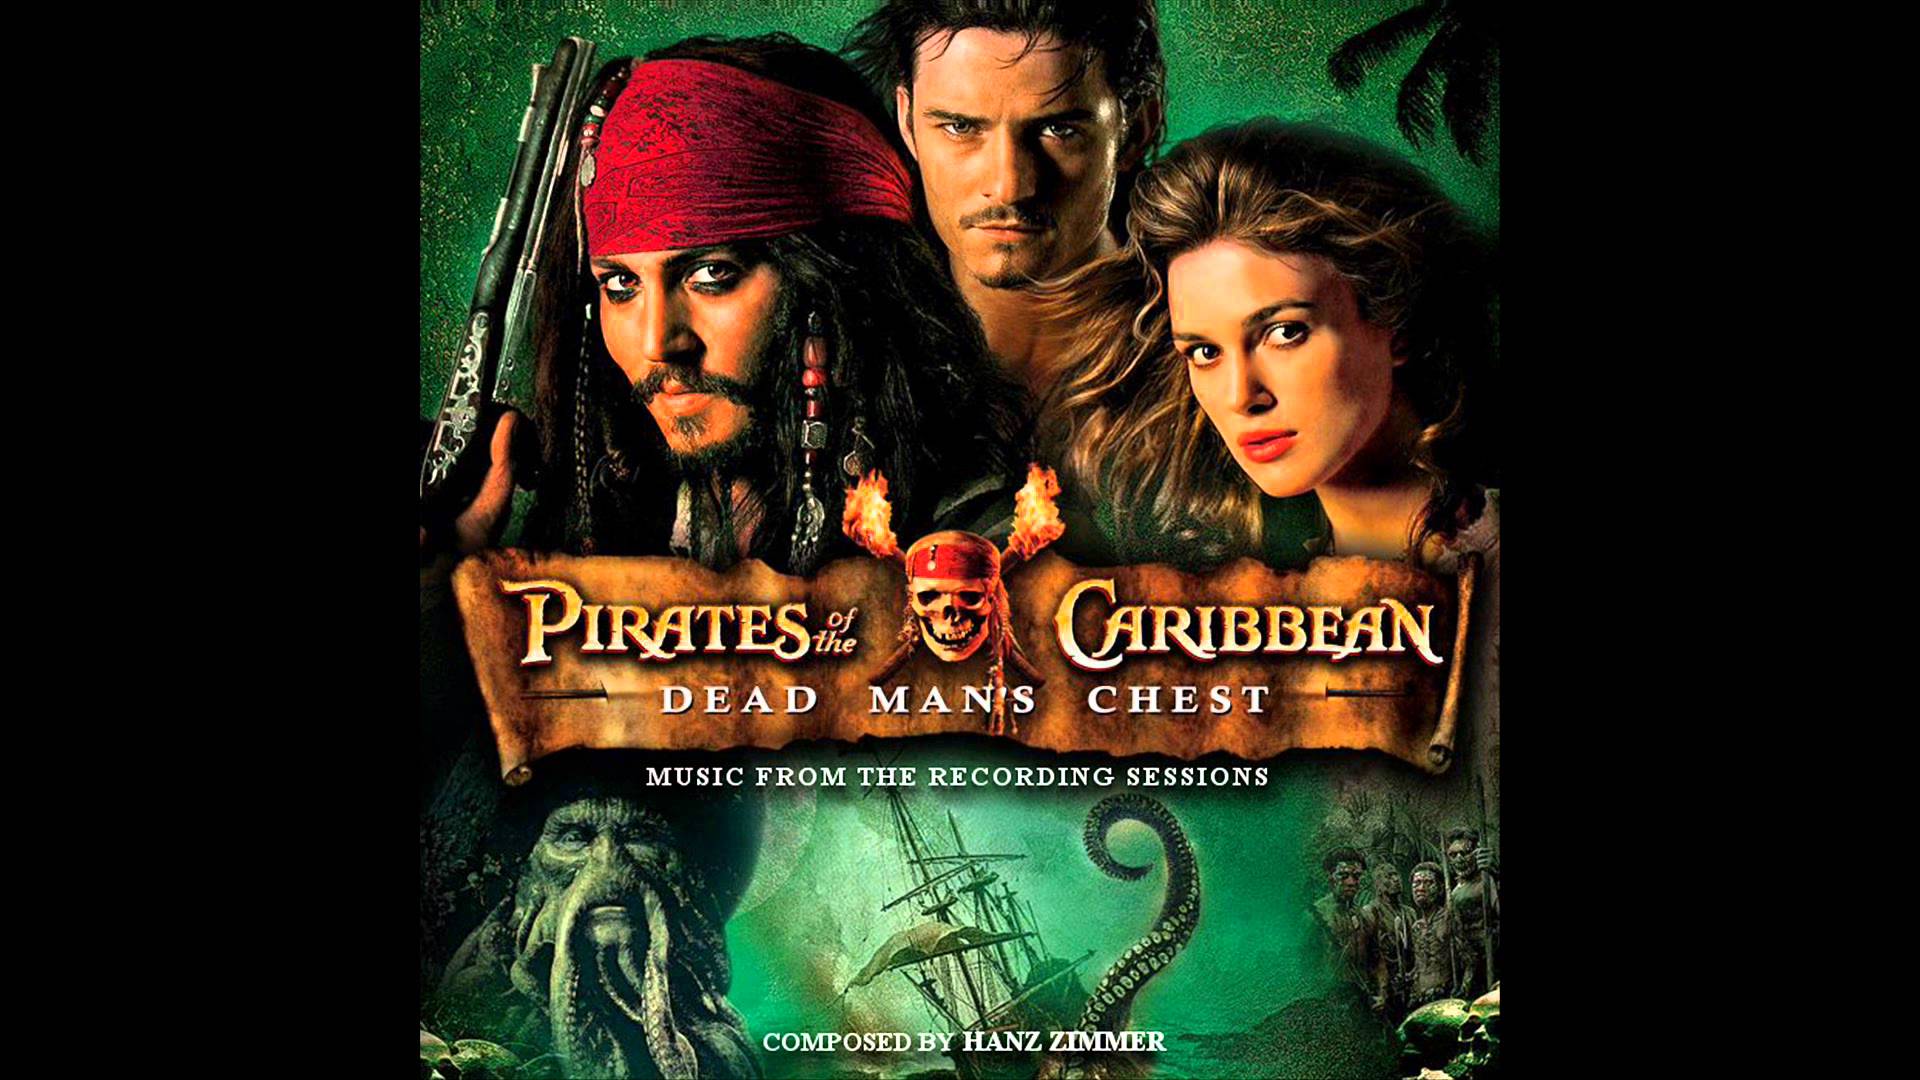 Pirates Of The Caribbean: Dead Man's Chest Pics, Movie Collection